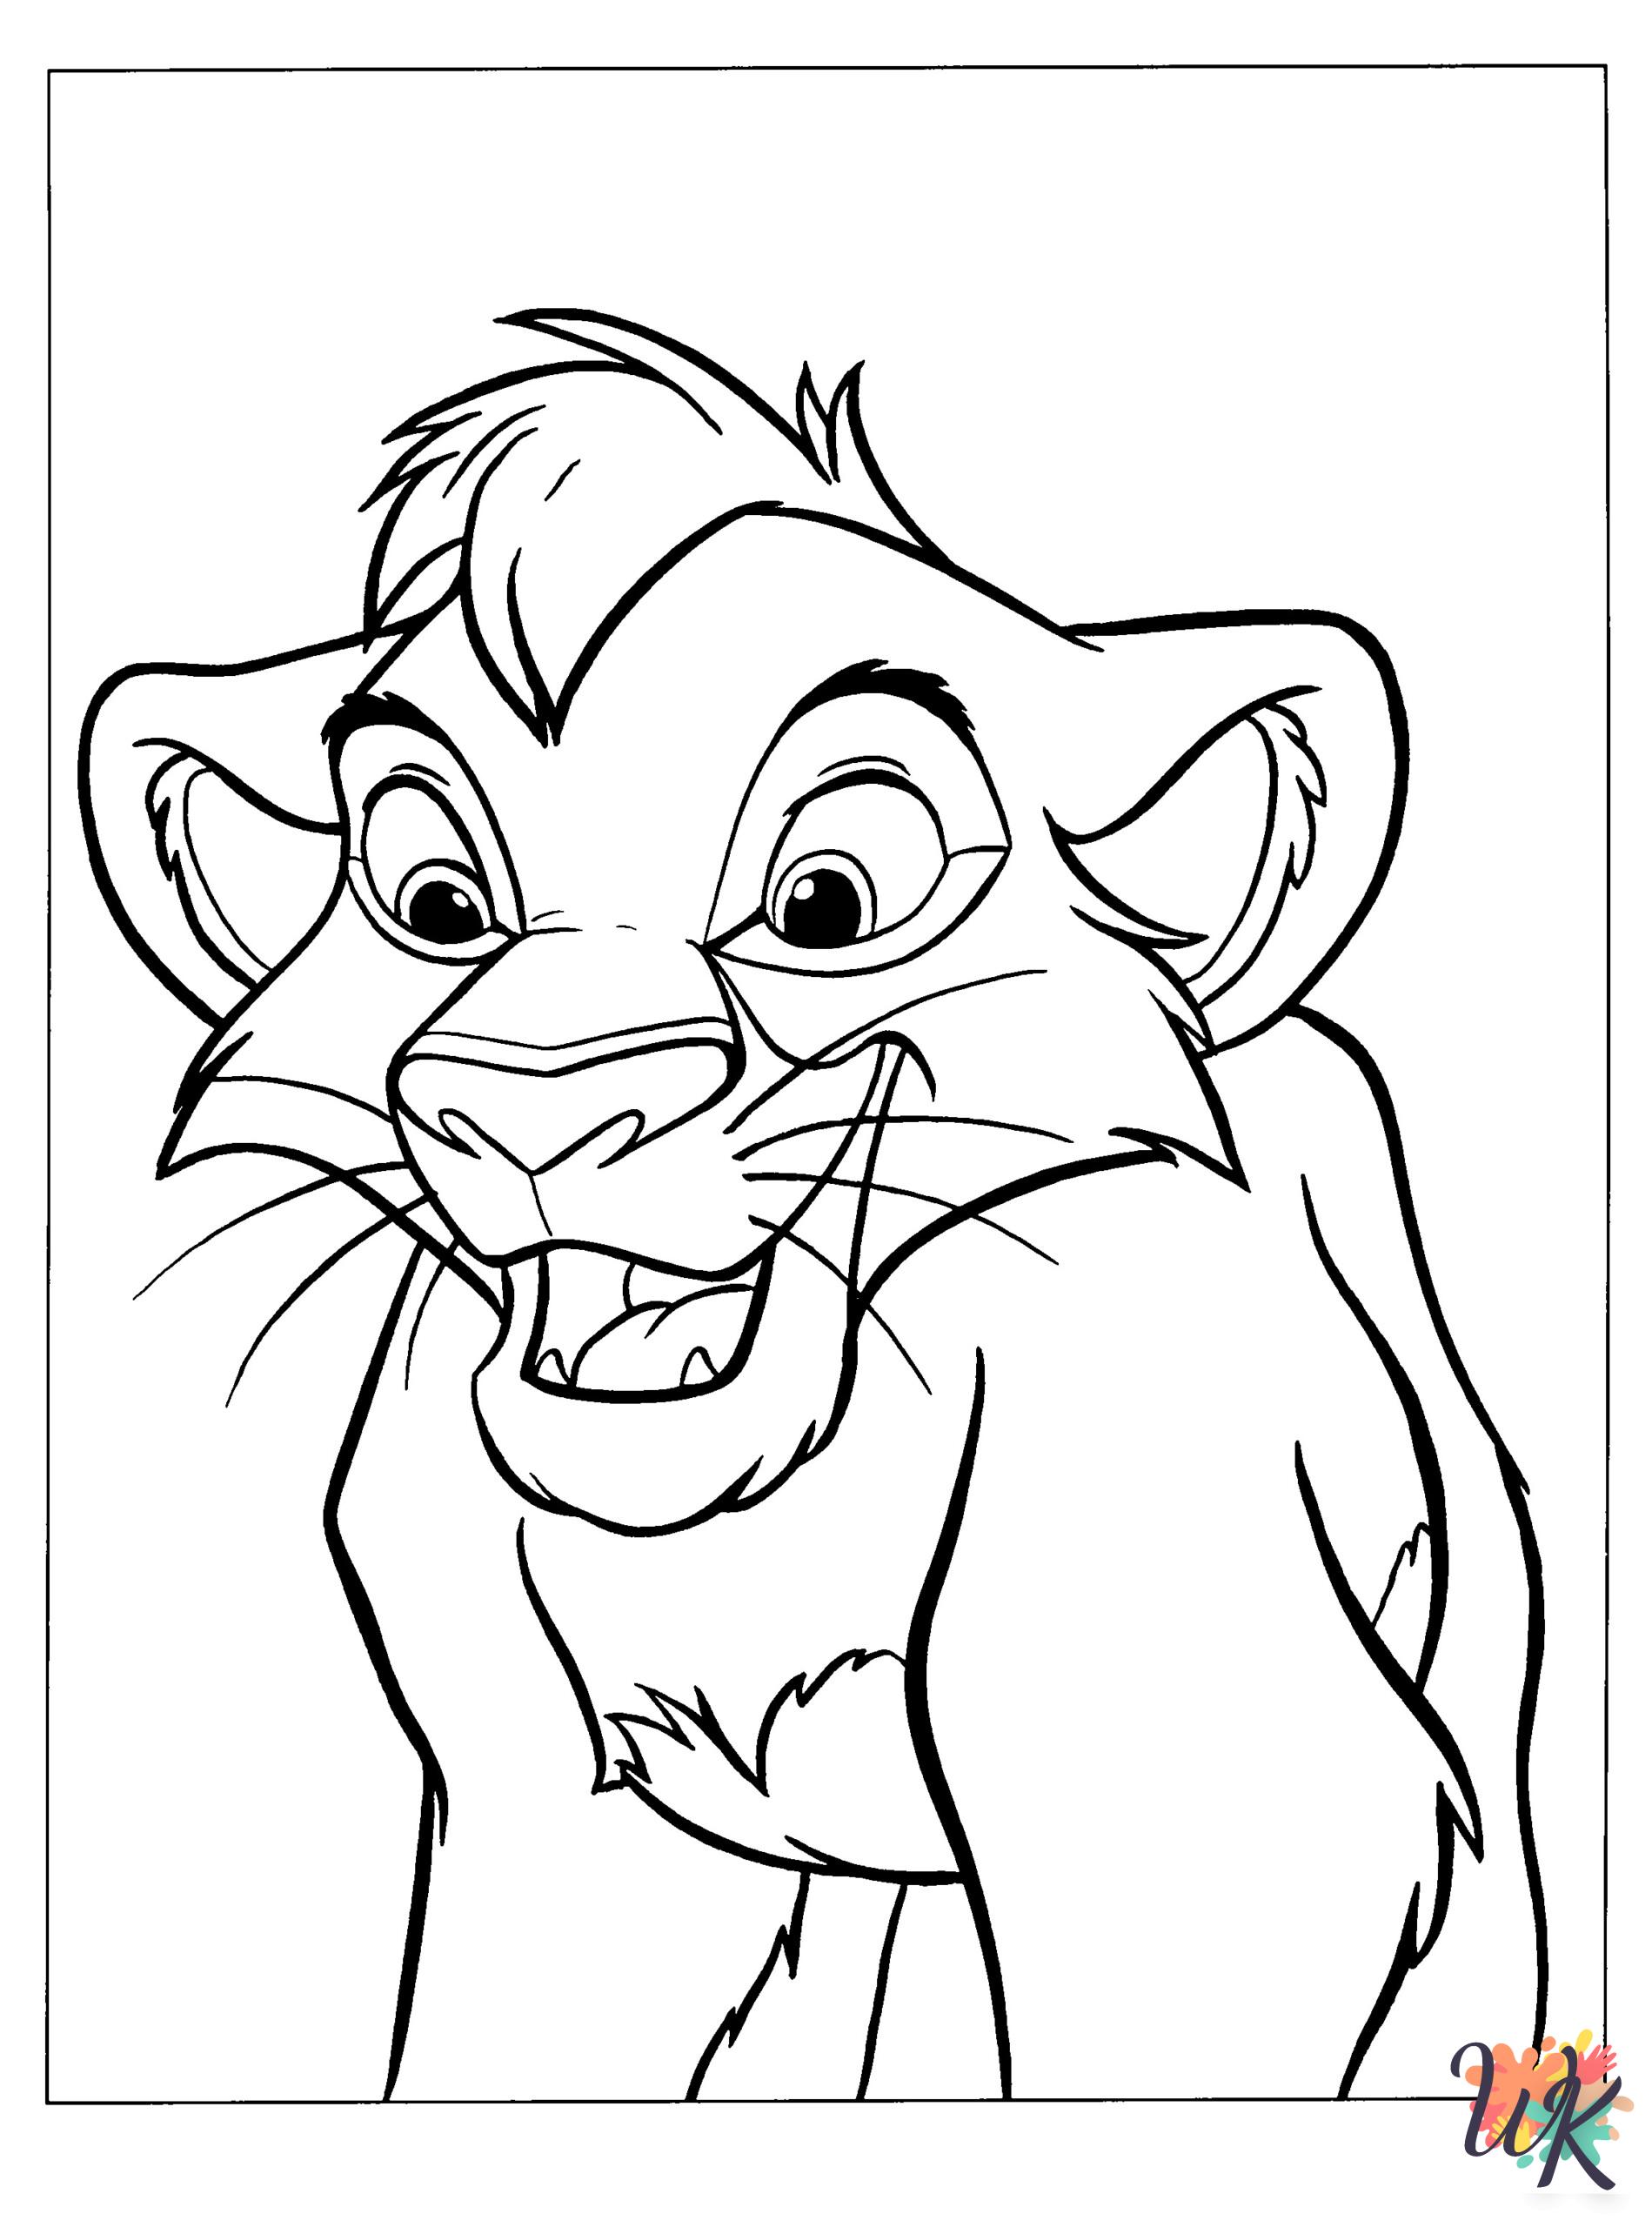 Lion King free coloring pages